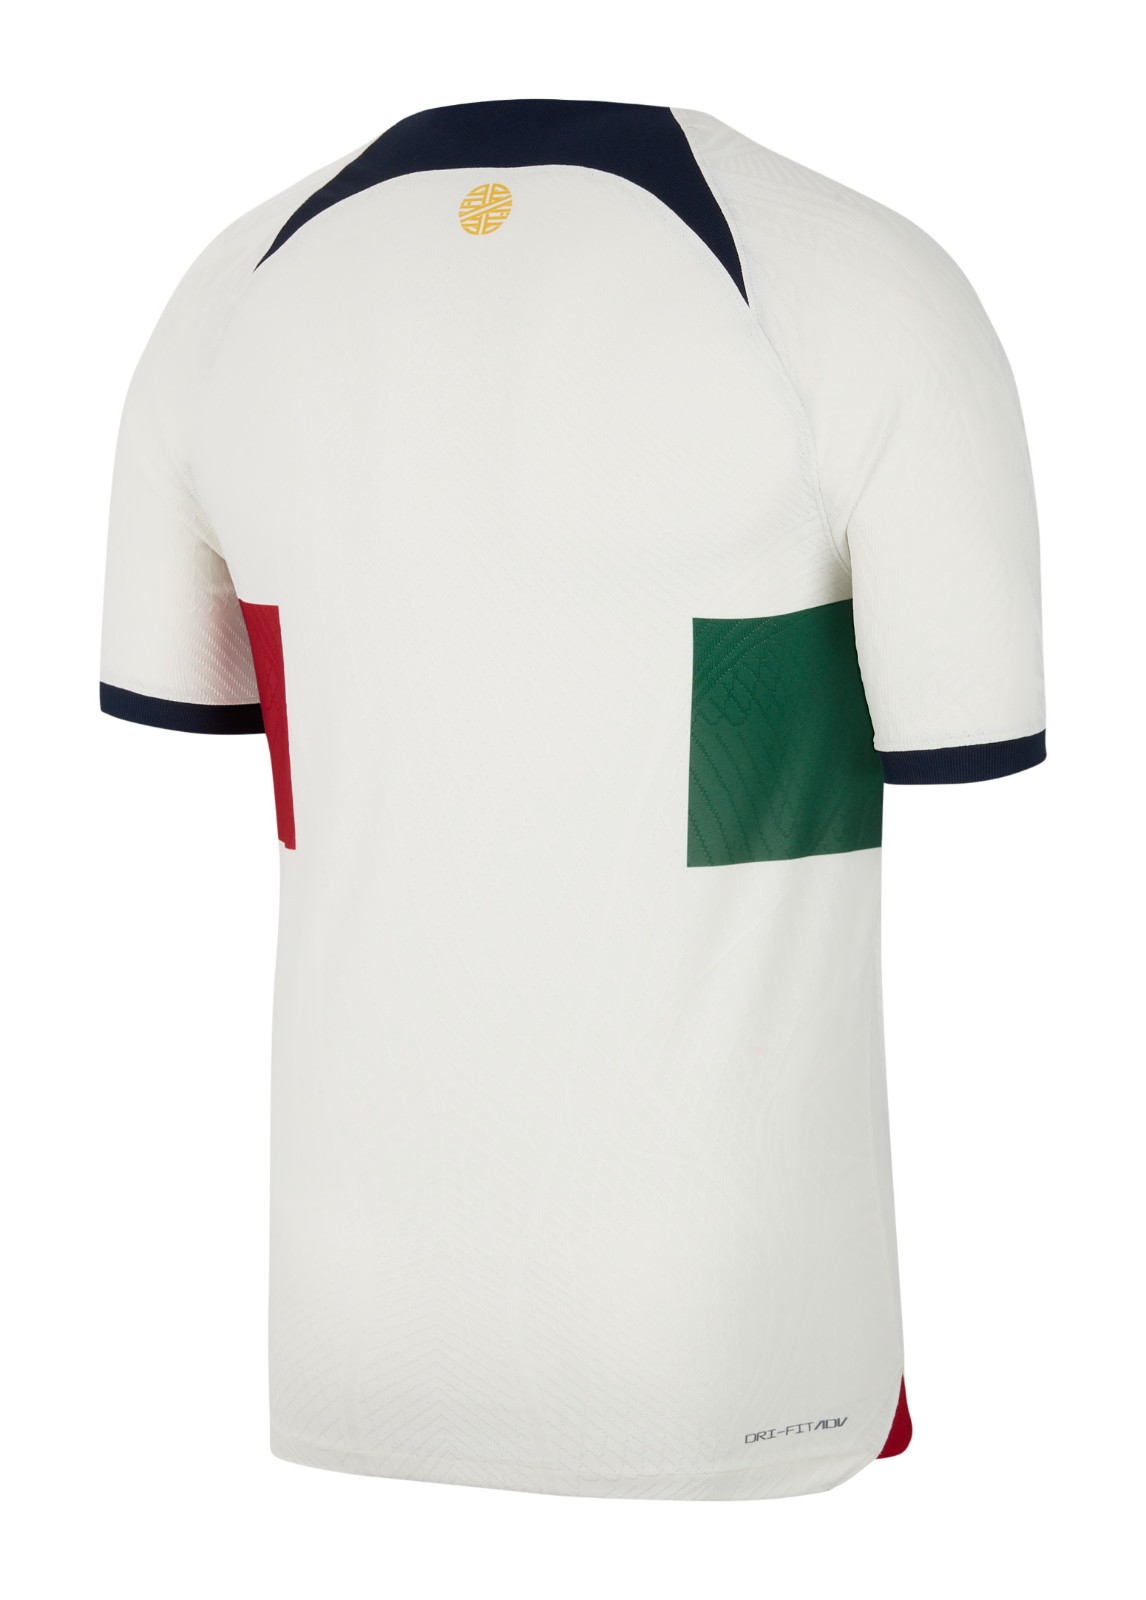 Portugal FIFA World Cup 2022 Away Kit Back